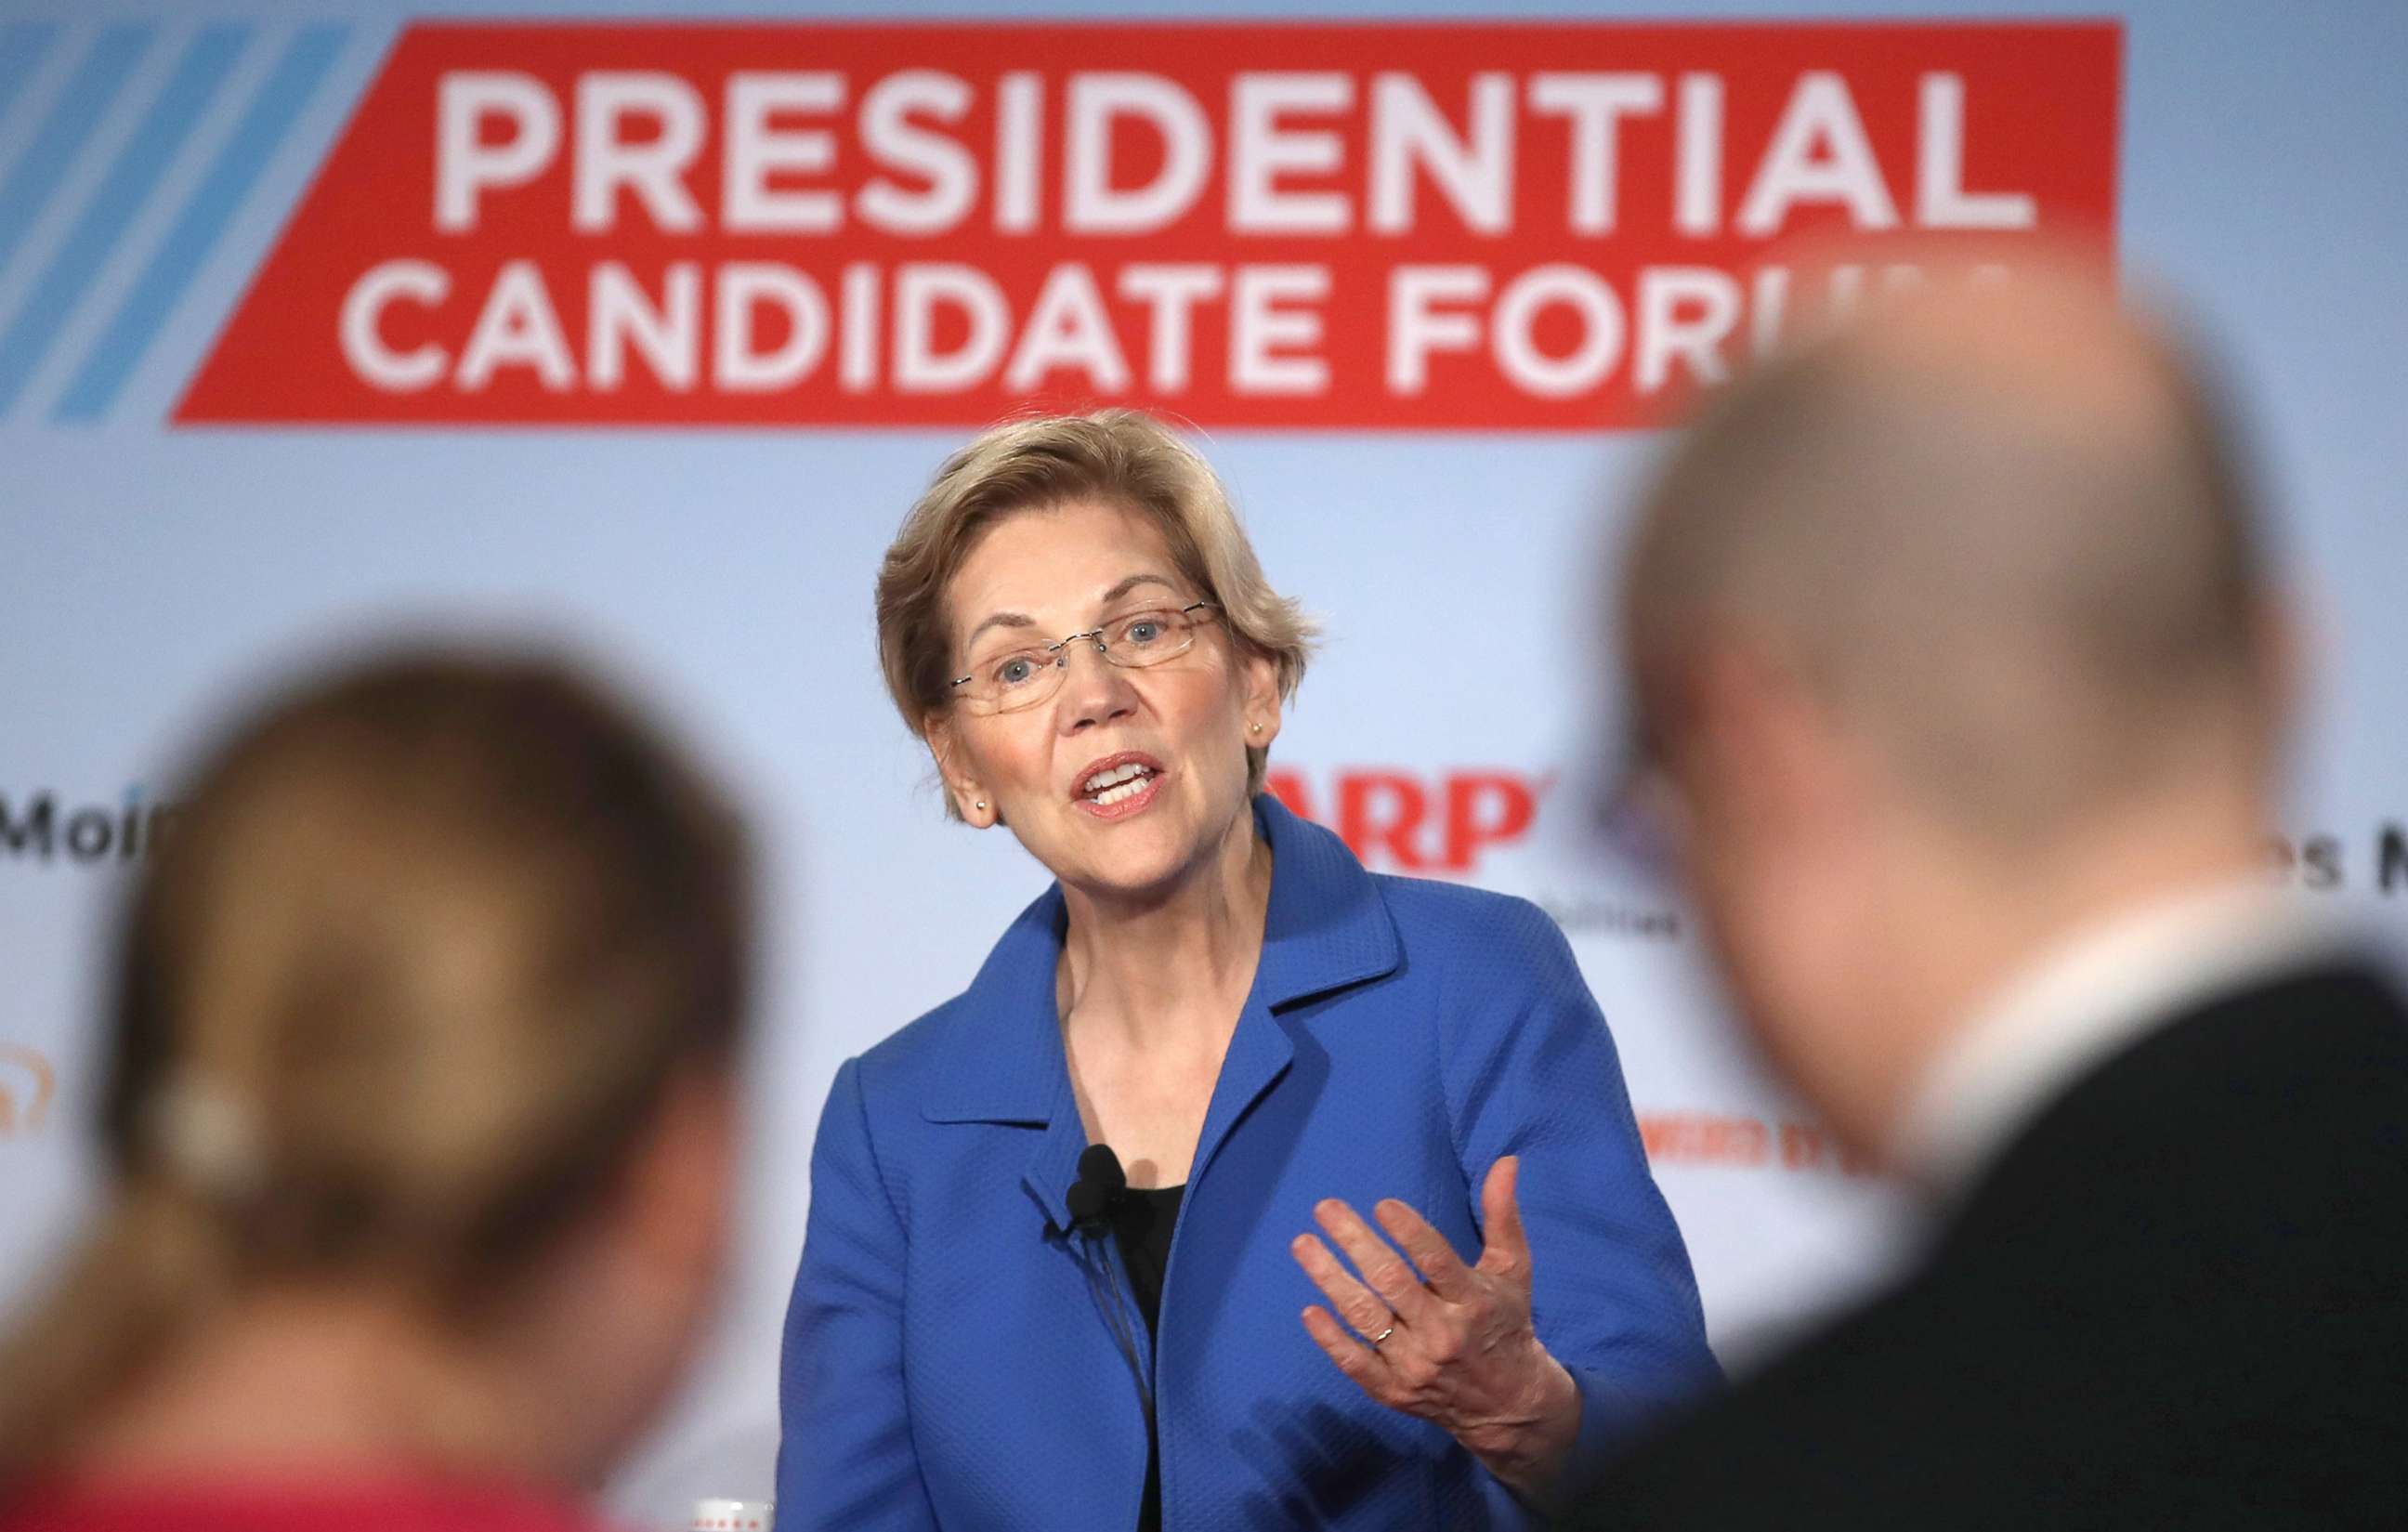 PHOTO:Democratic presidential hopeful Sen. Elizabeth Warren (D-MA) speaks during the AARP and The Des Moines Register Iowa Presidential Candidate Forum, July 19, 2019, in Sioux City, Iowa.